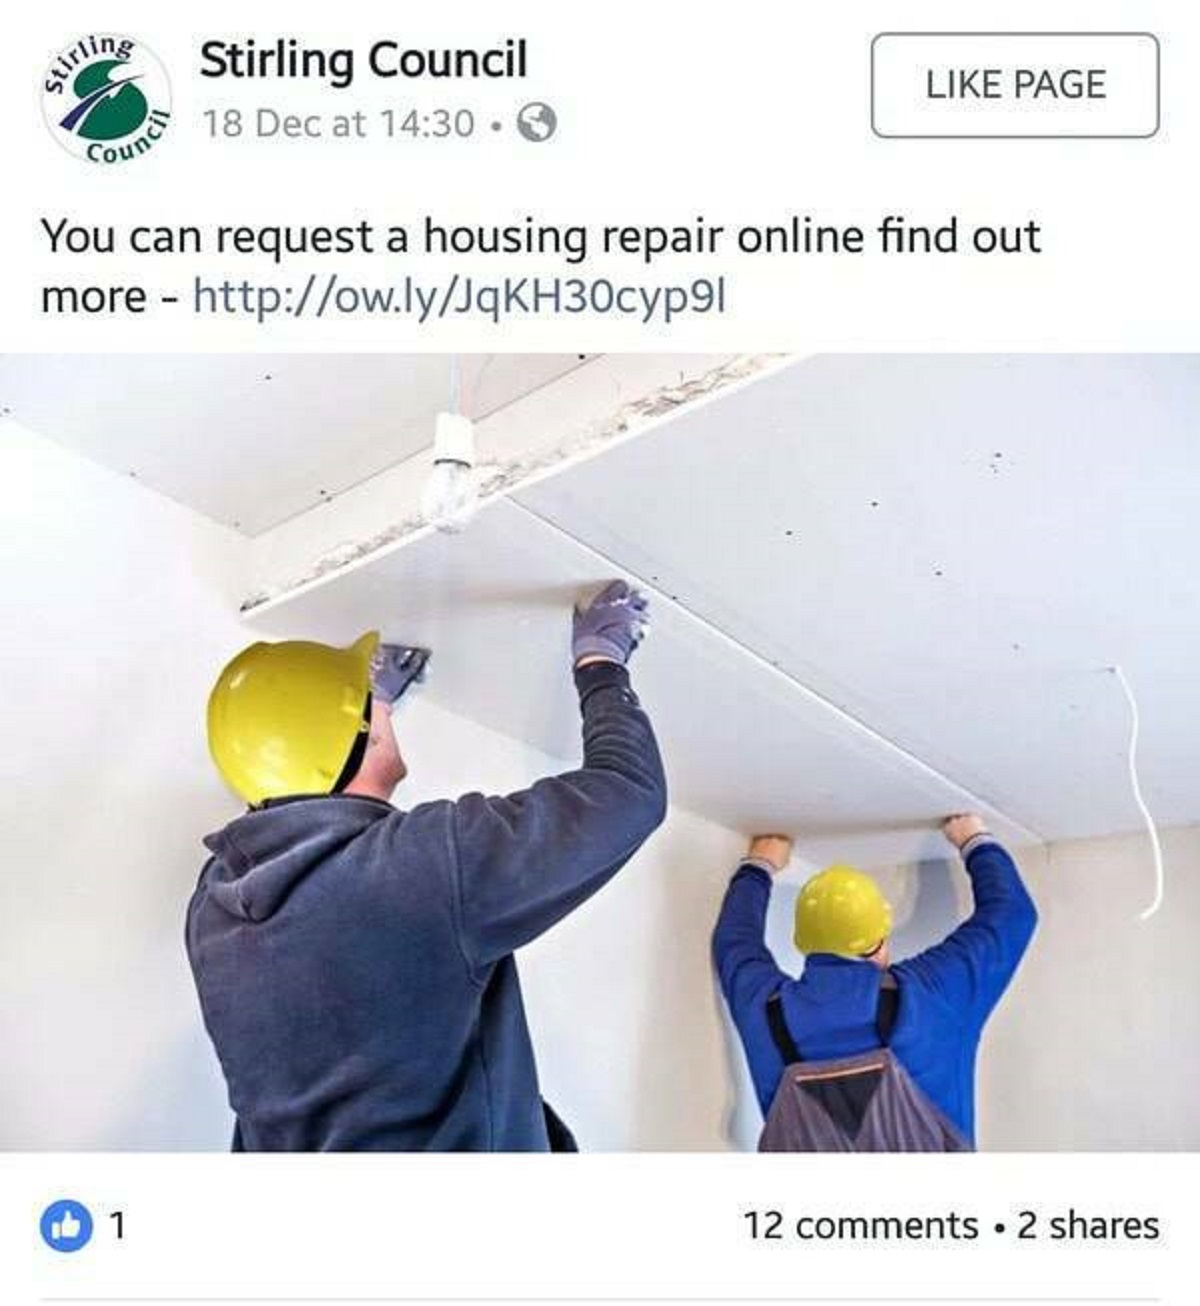 “Stirling Council have photoshopped hardhats on to their workers”